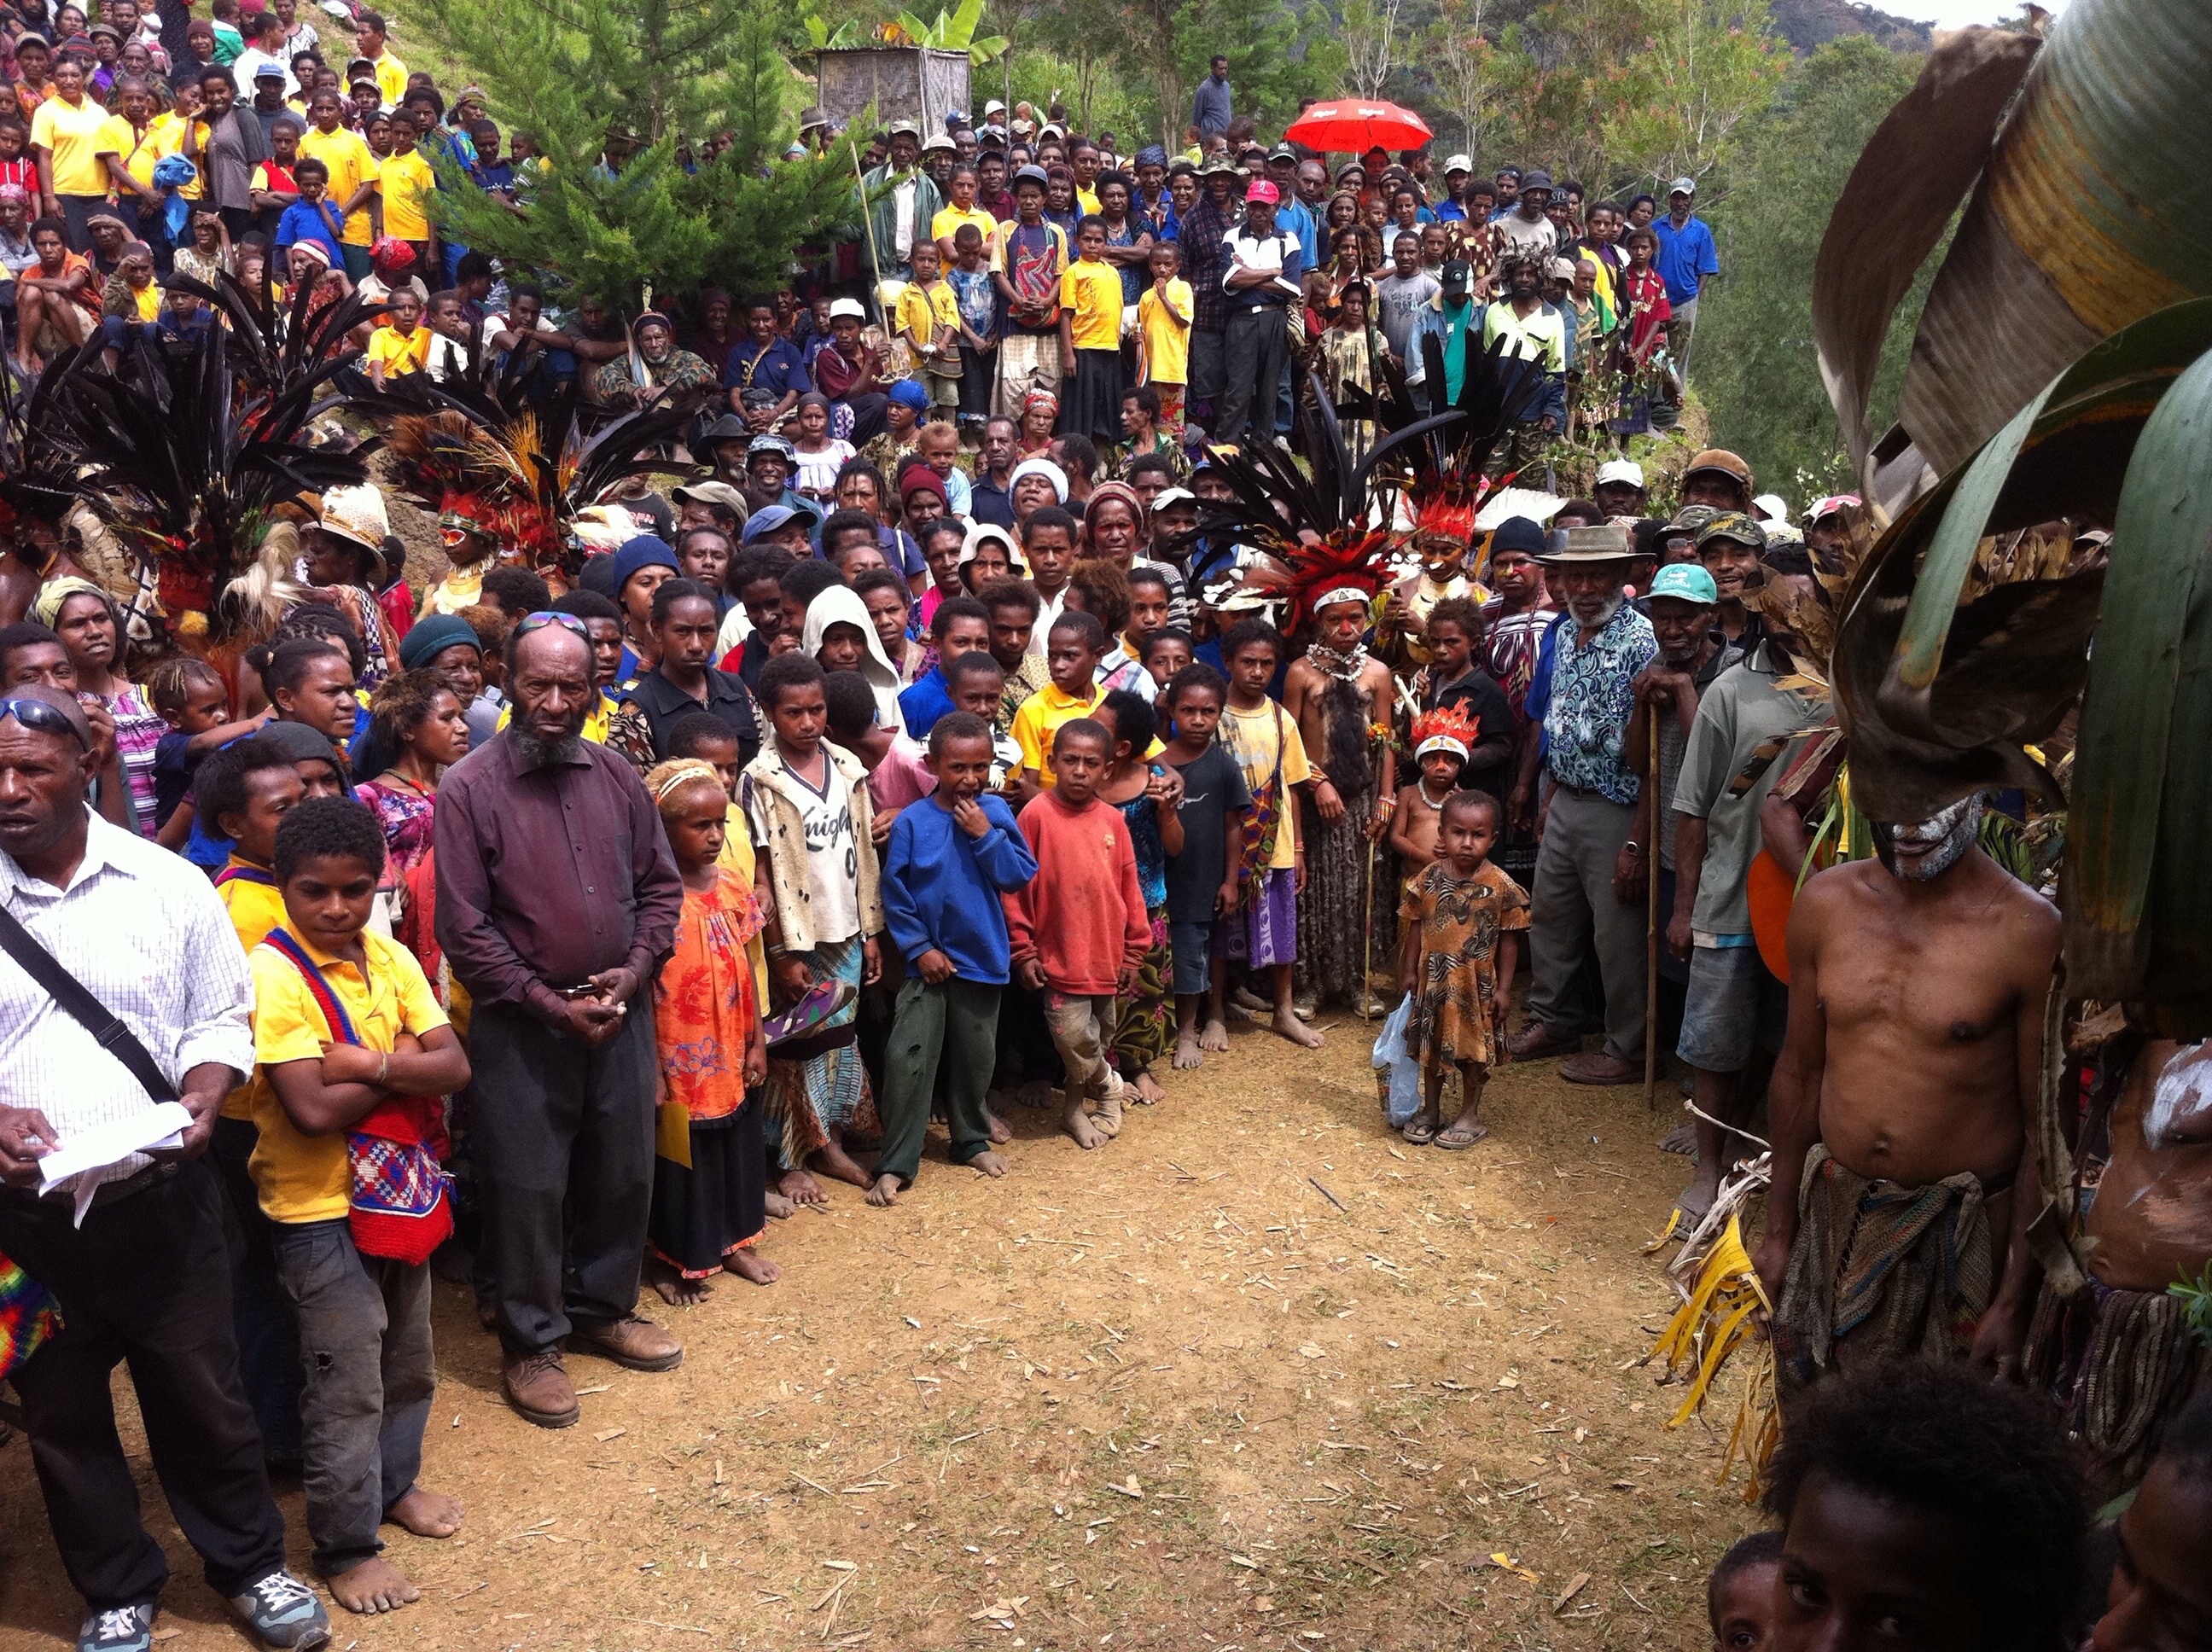 A large crowd of Papua New Guineans wait patiently to see Doctors.